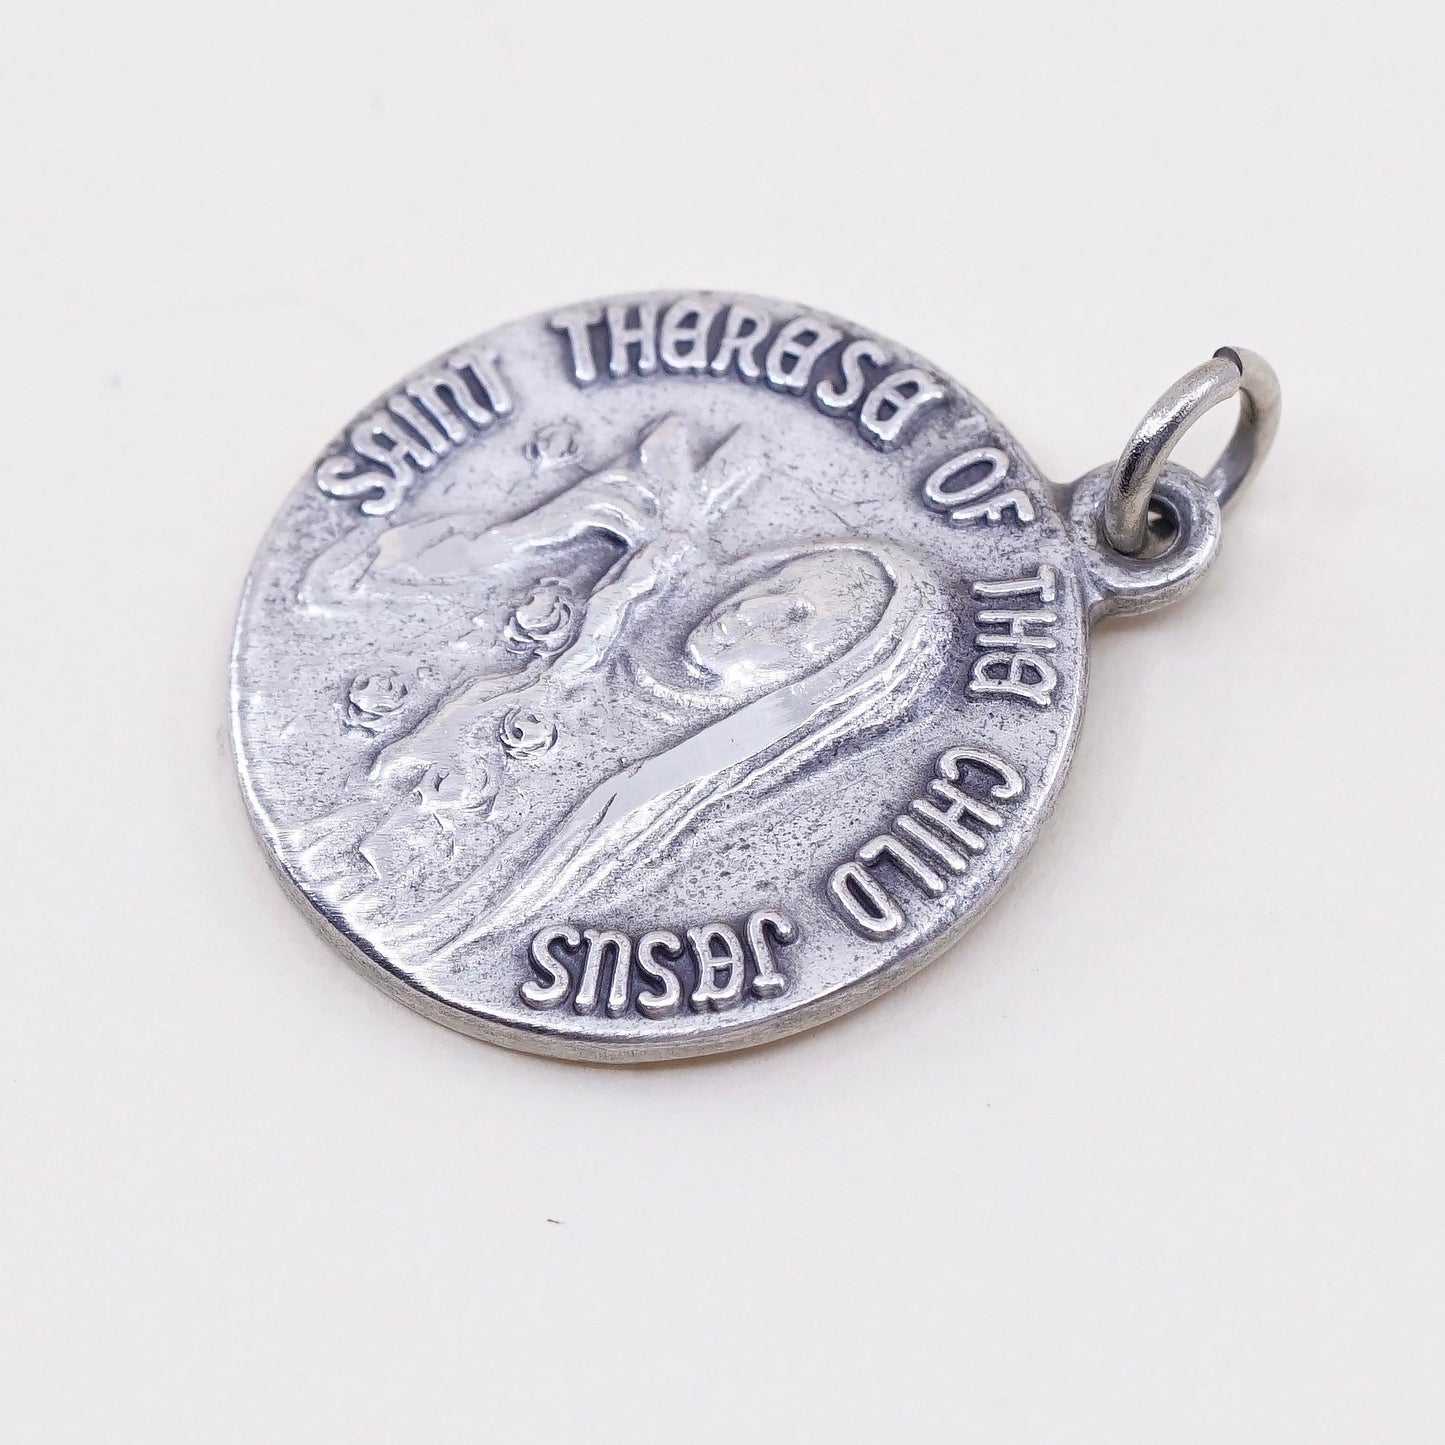 vintage sterling 925 silver pendant charm “Saint Theresa of the child Jesus”